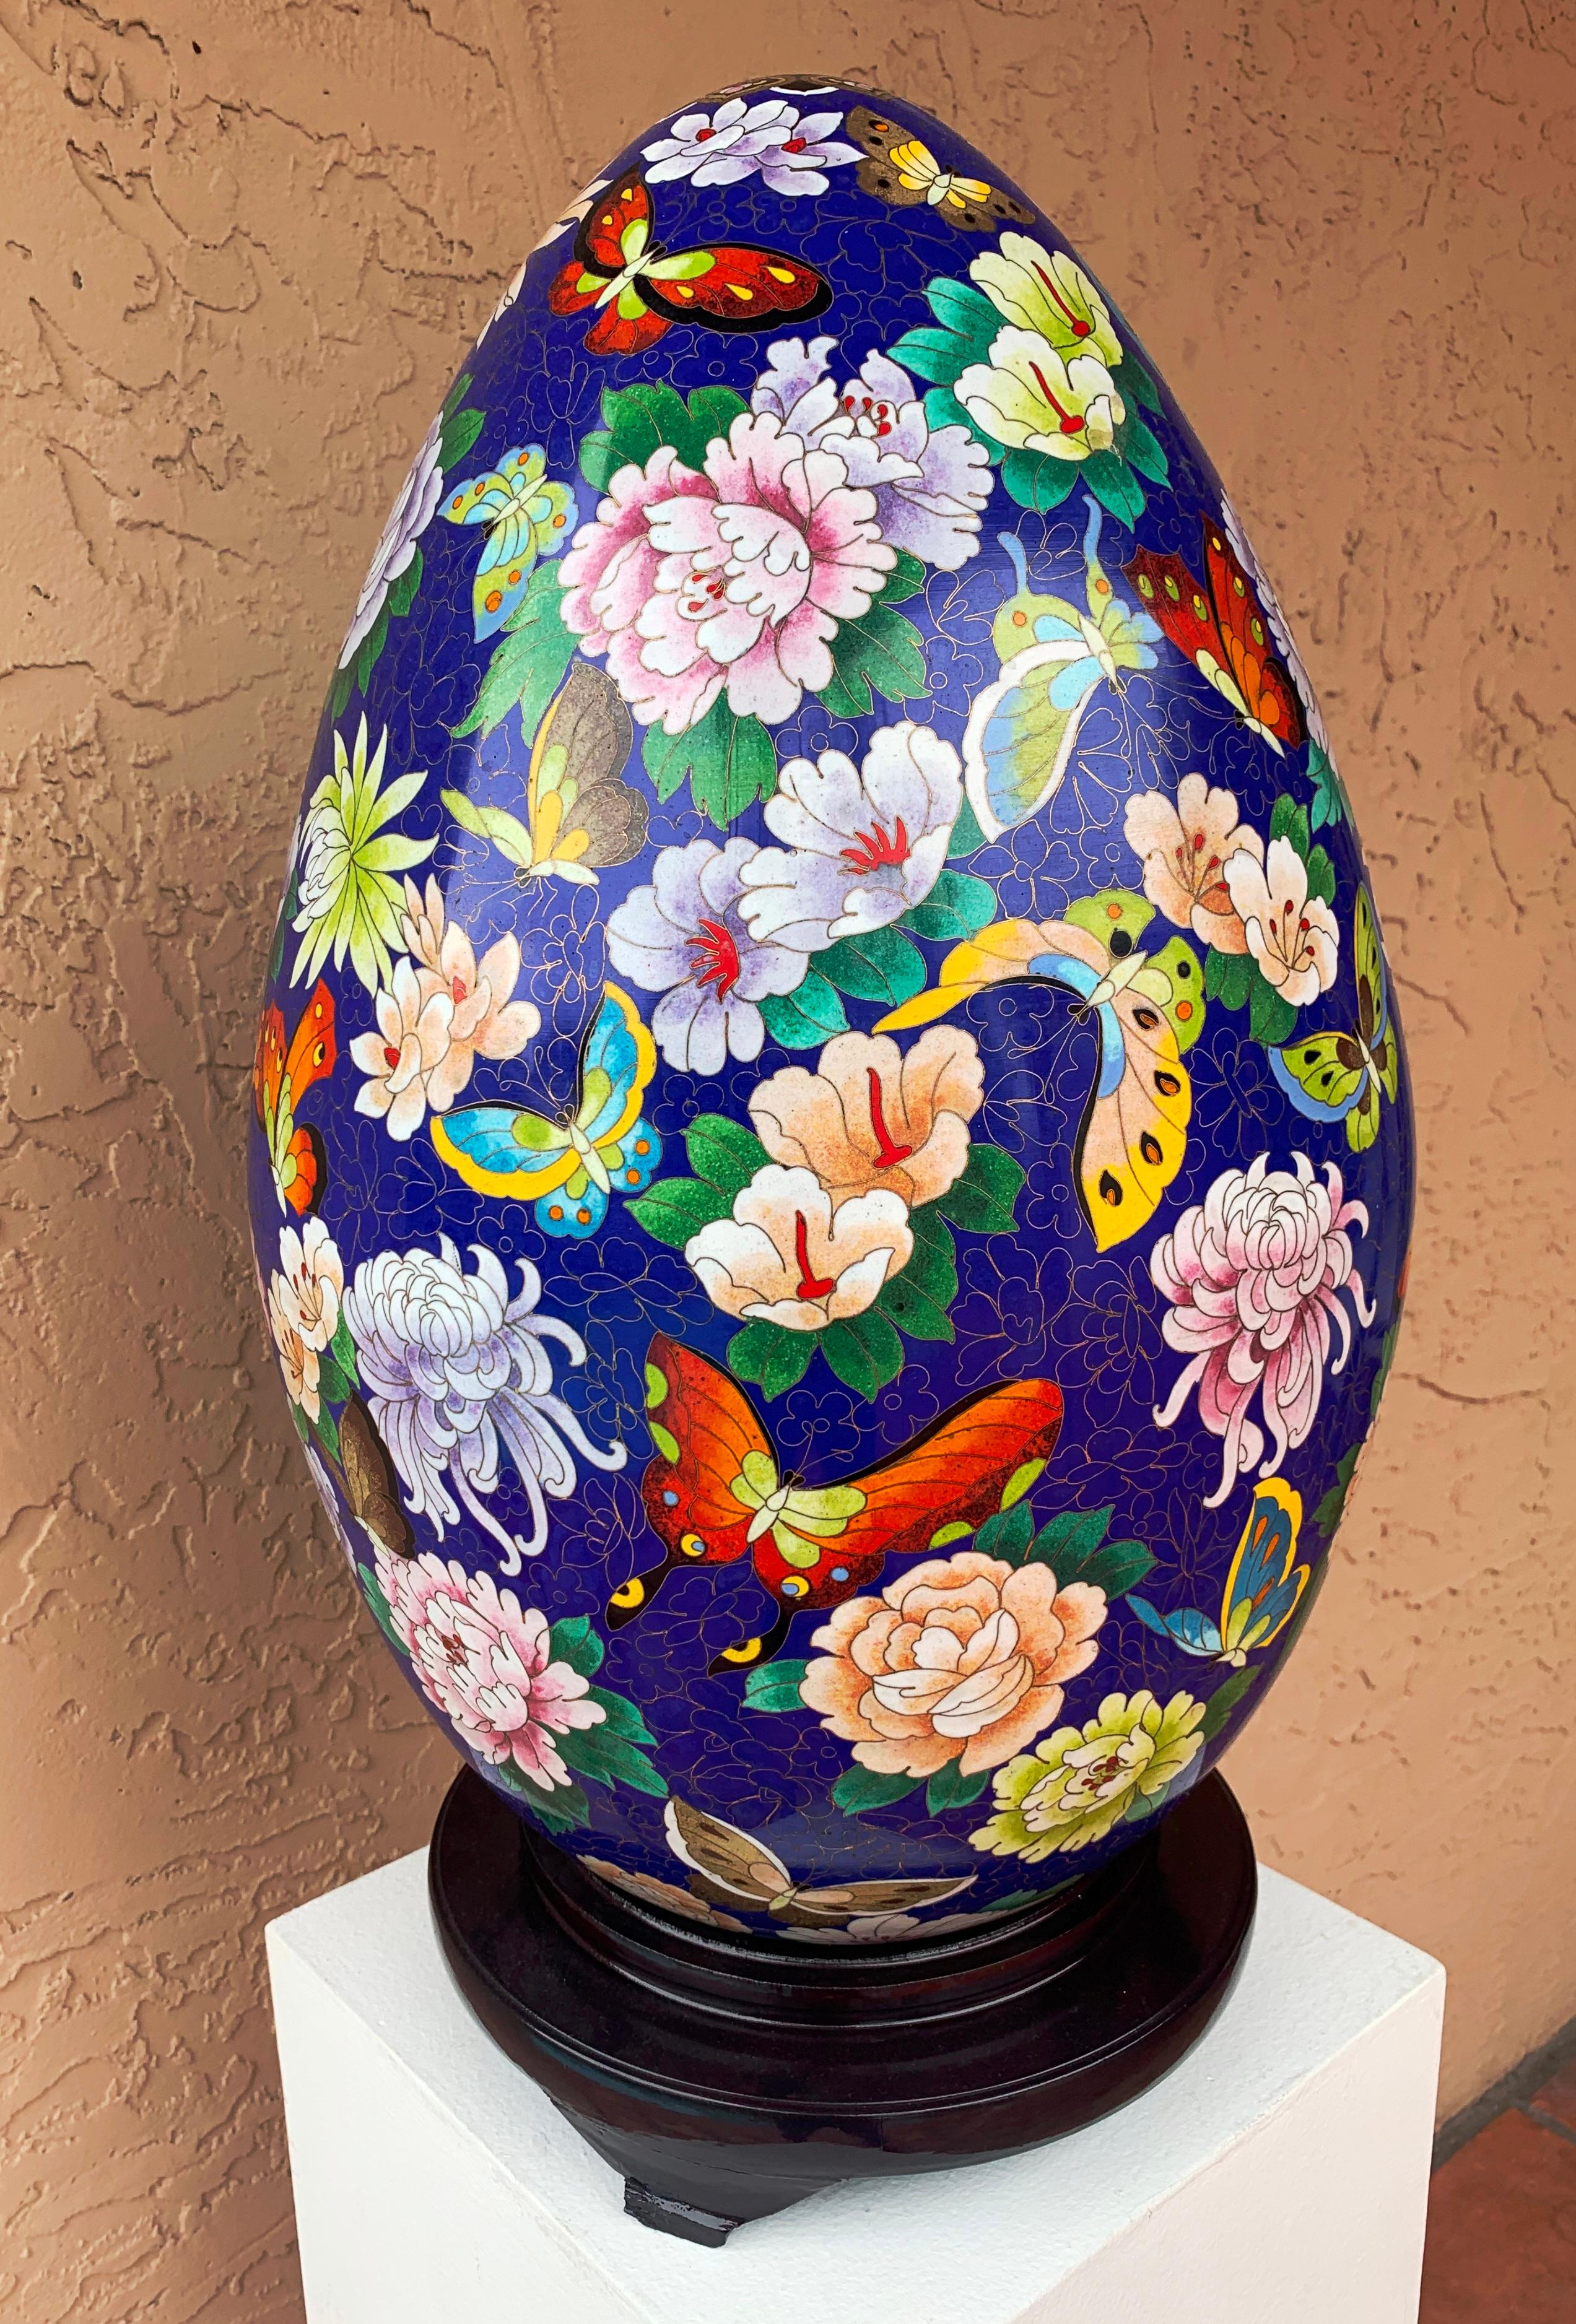 Unknown Still-Life Sculpture - Large Cloisonné Eggs Set of 2 Blue & Red with Birds Flowers